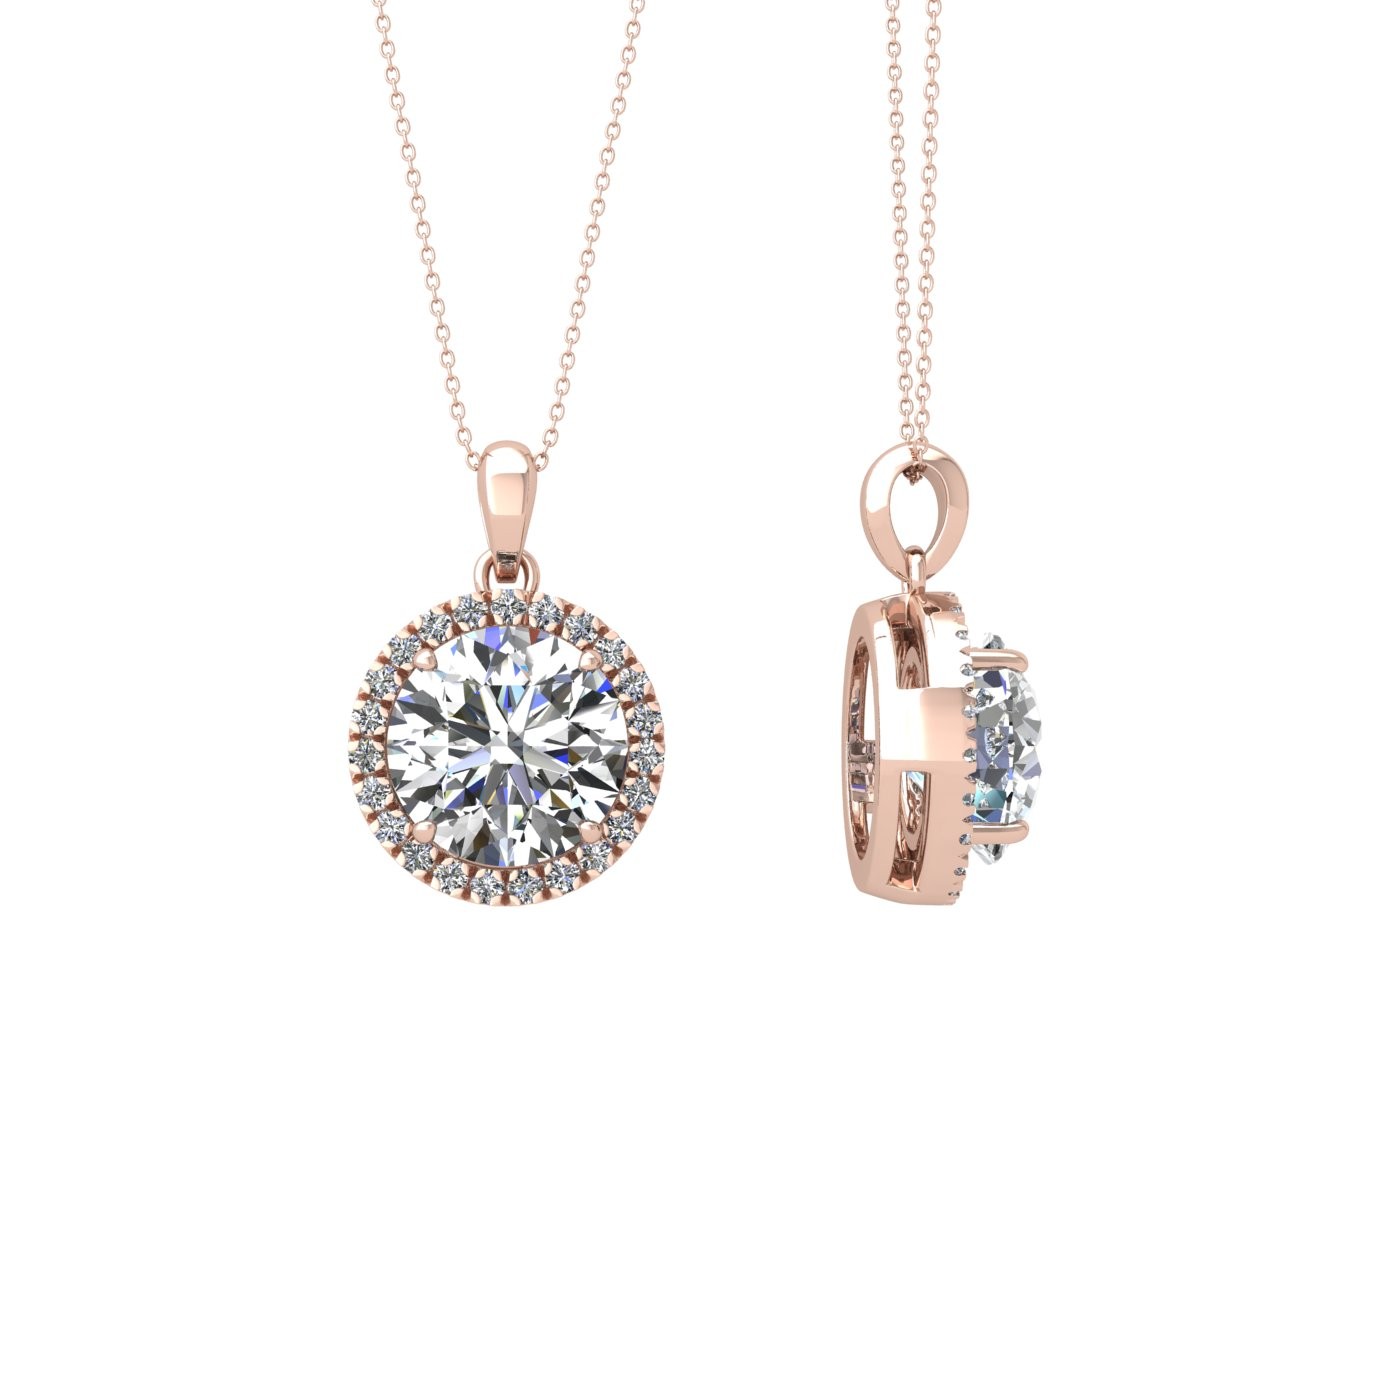 18k rose gold  0,5 ct 4 prong round shape diamond pendant with diamond pavÉ set halo including chain seperate from the pendant